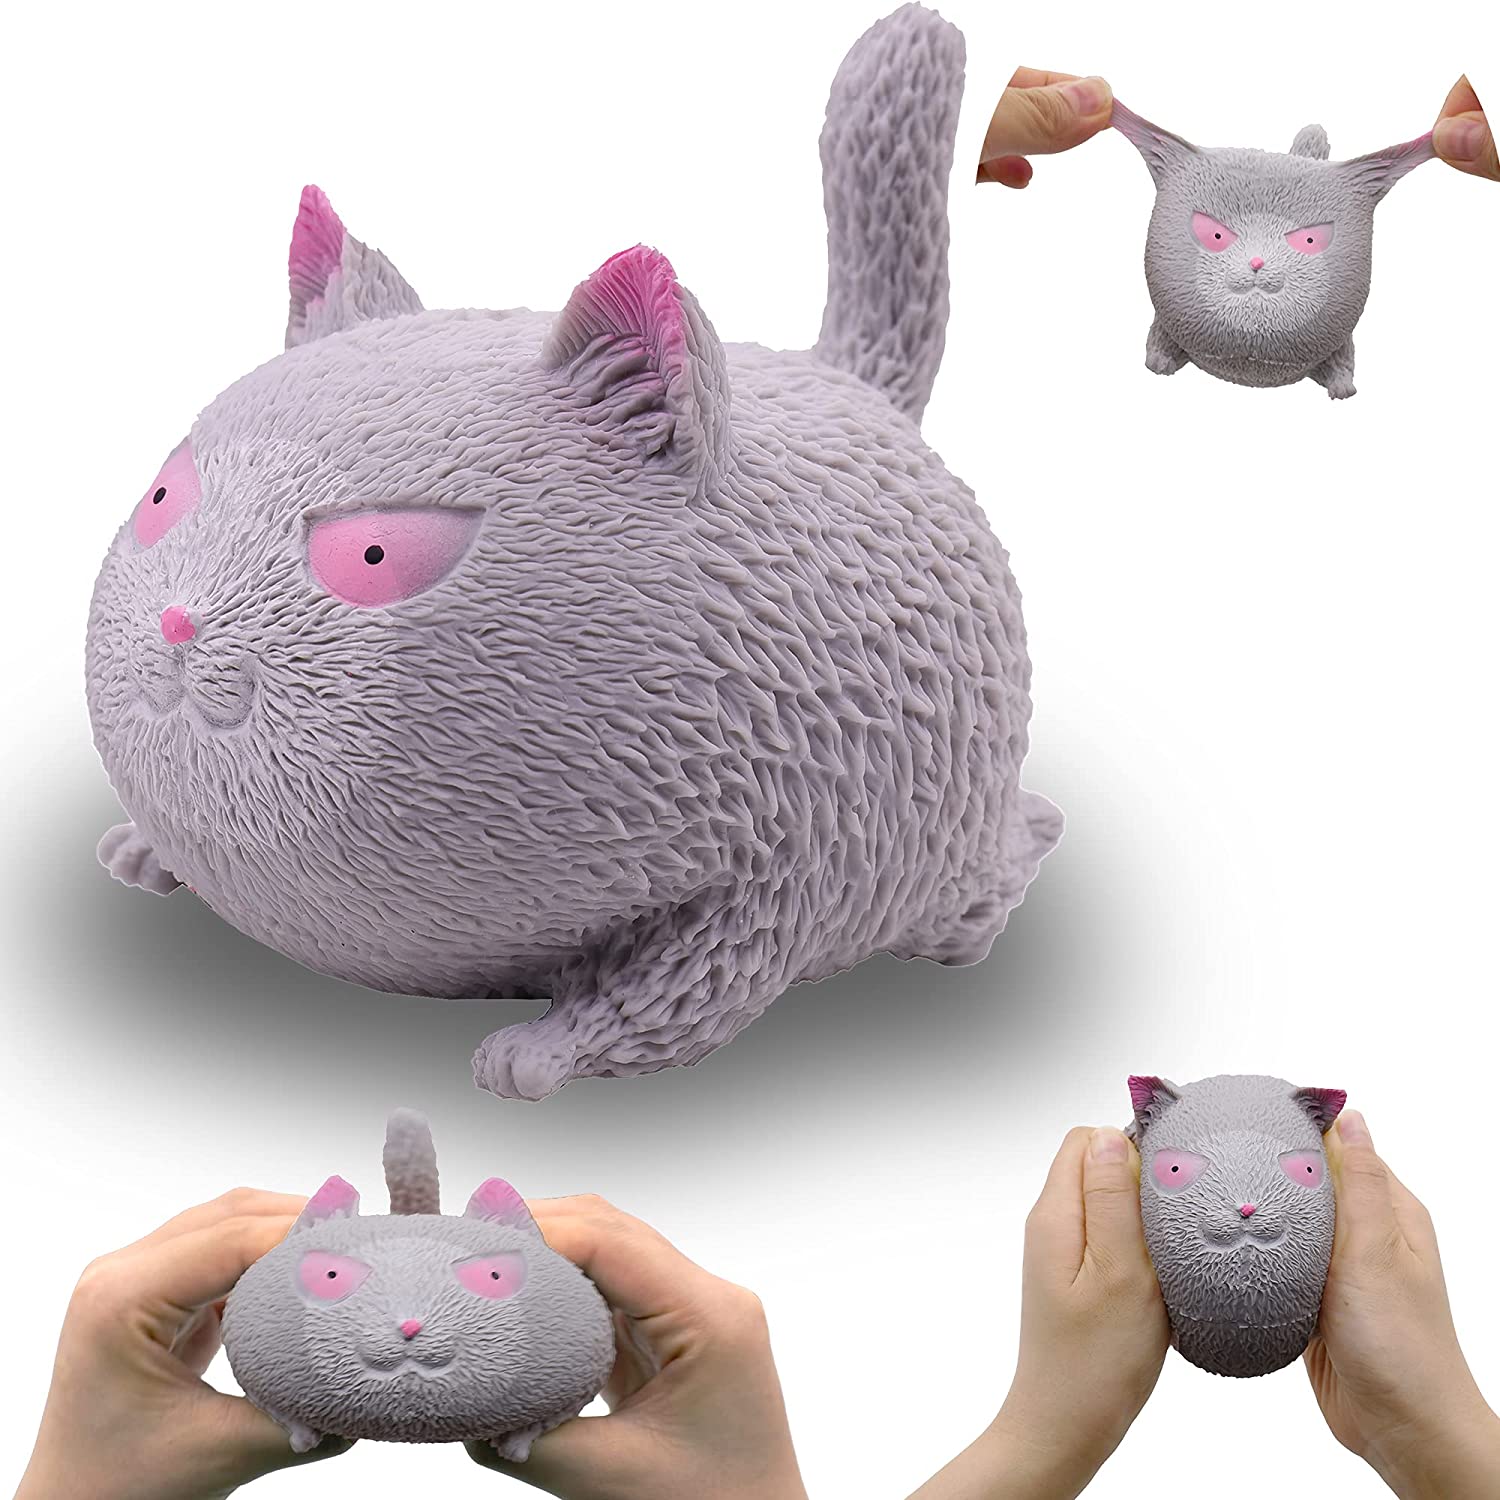 🔥Hot Sale - SAVE 49% OFF - Funny Cute Cat-Shaped Ball(BUY 3 GET 1 FREE NOW)